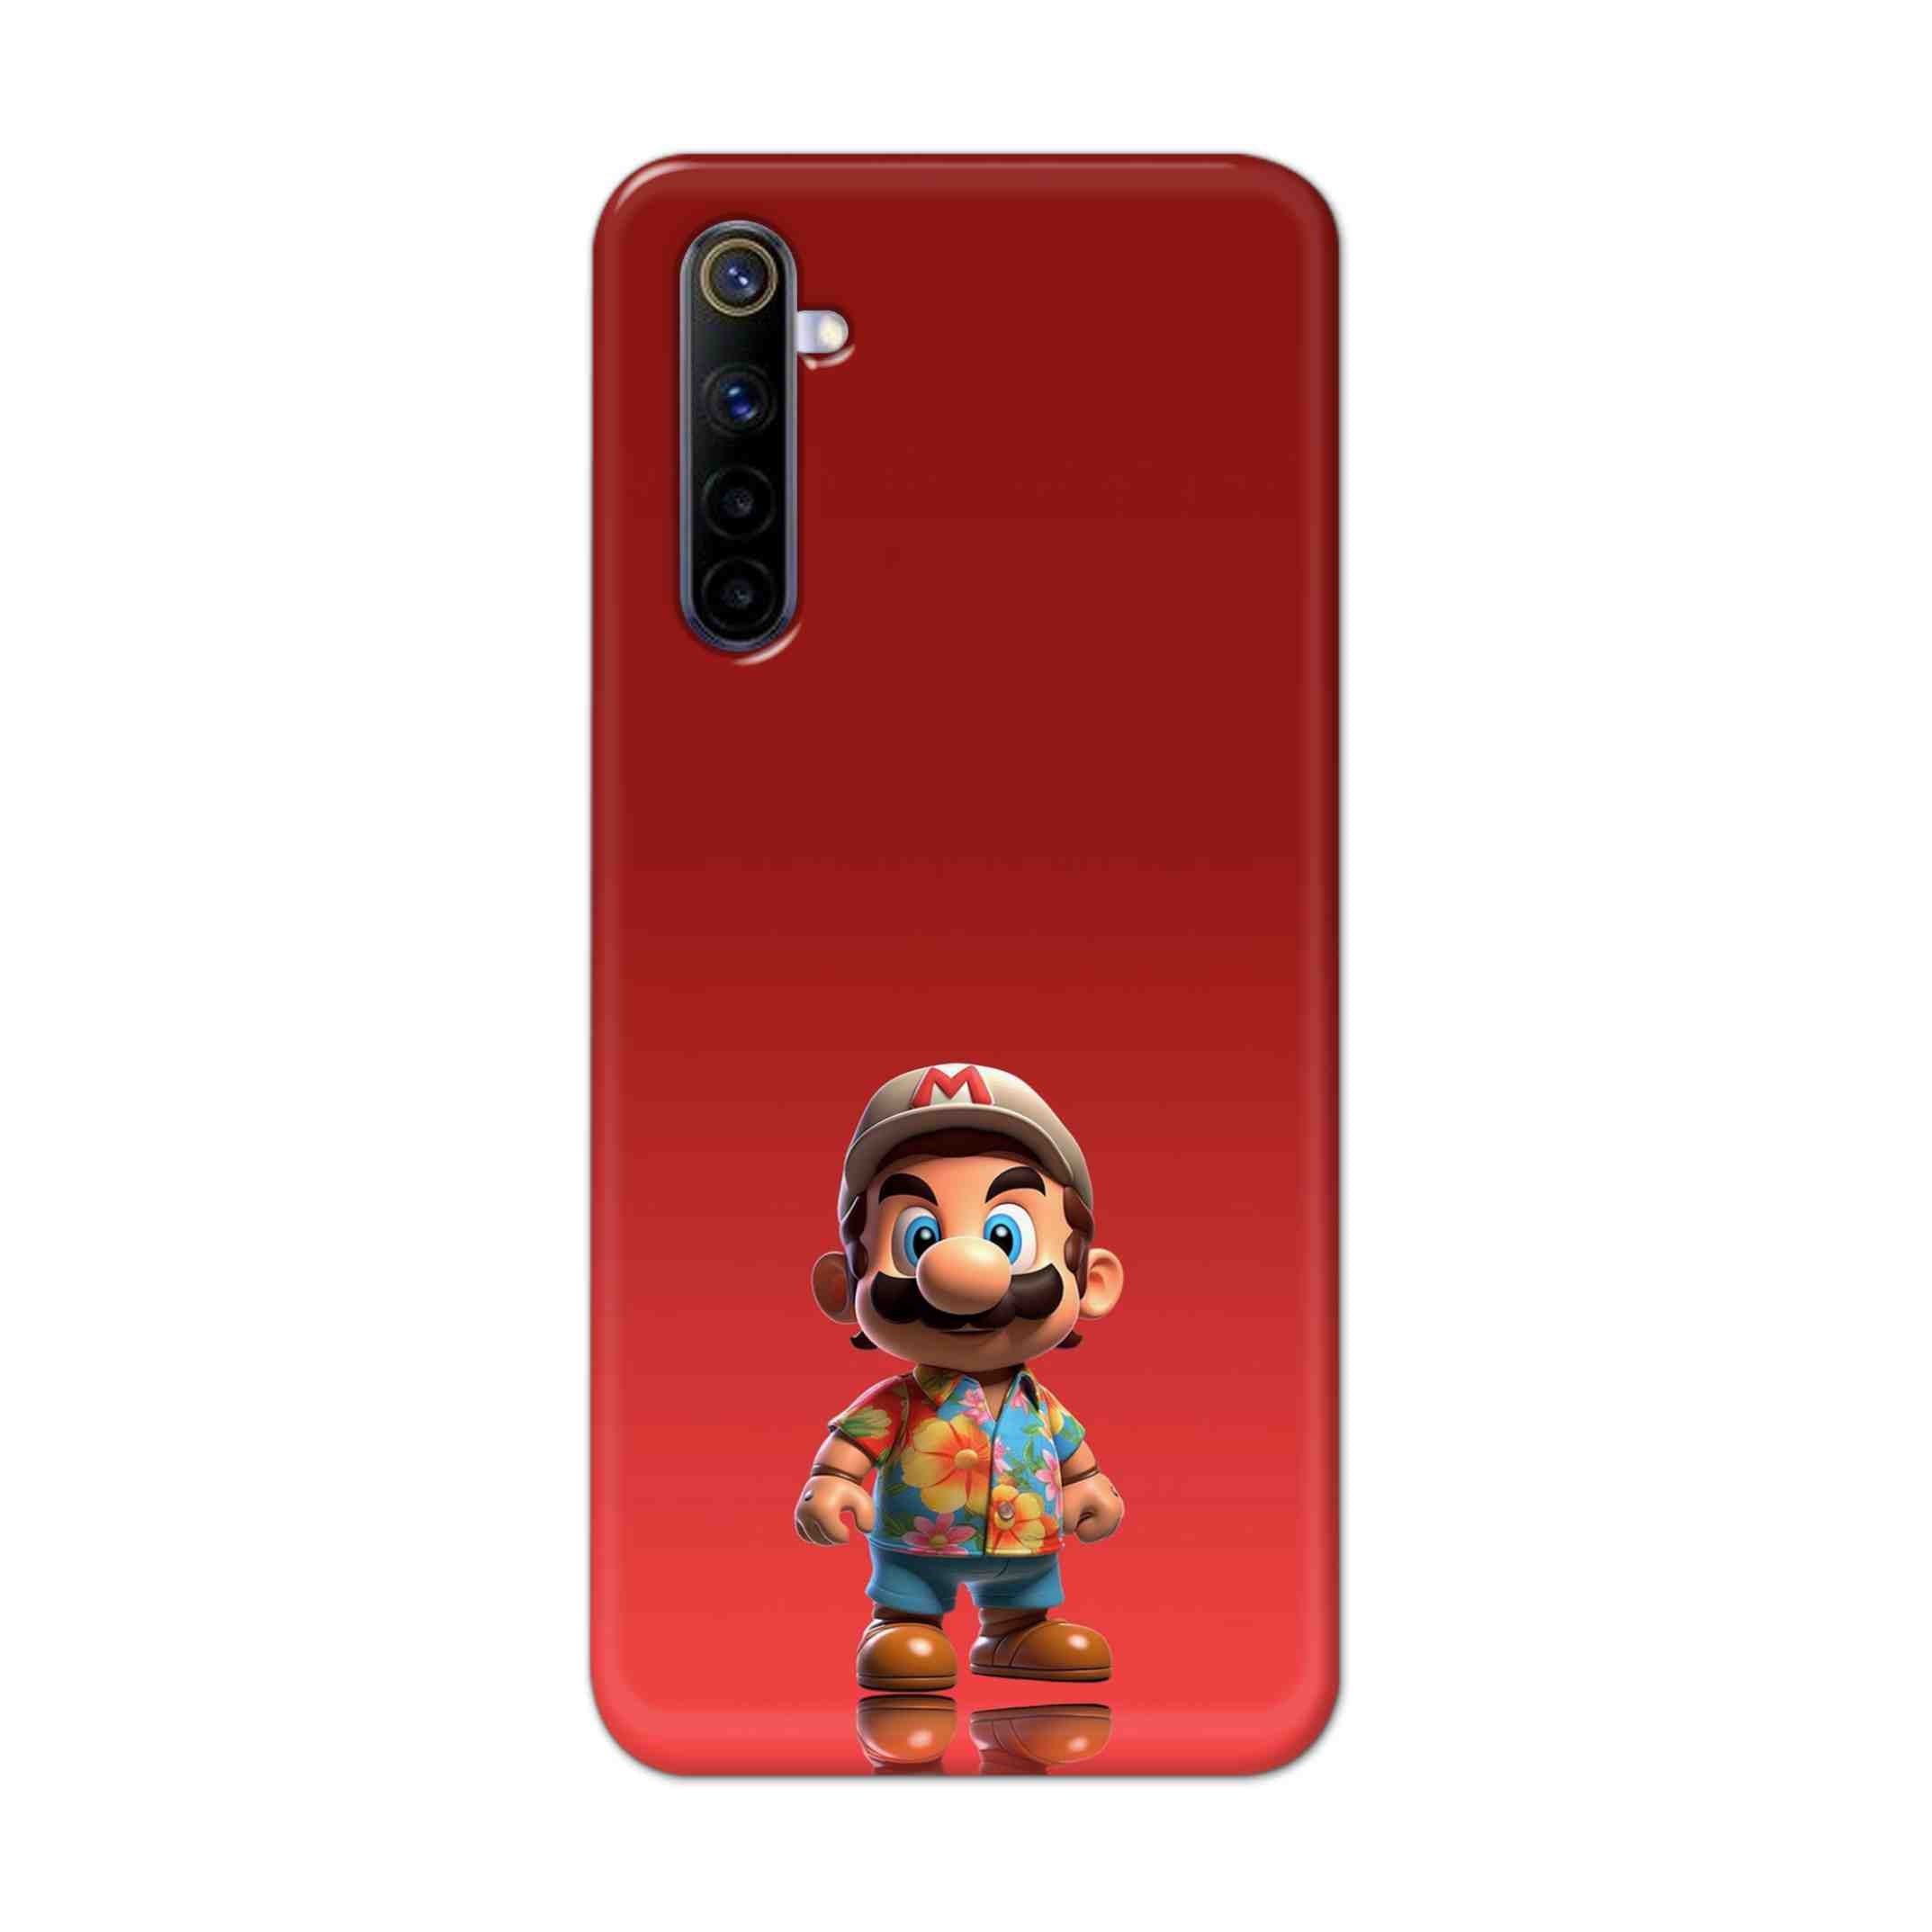 Buy Mario Hard Back Mobile Phone Case Cover For REALME 6 Online